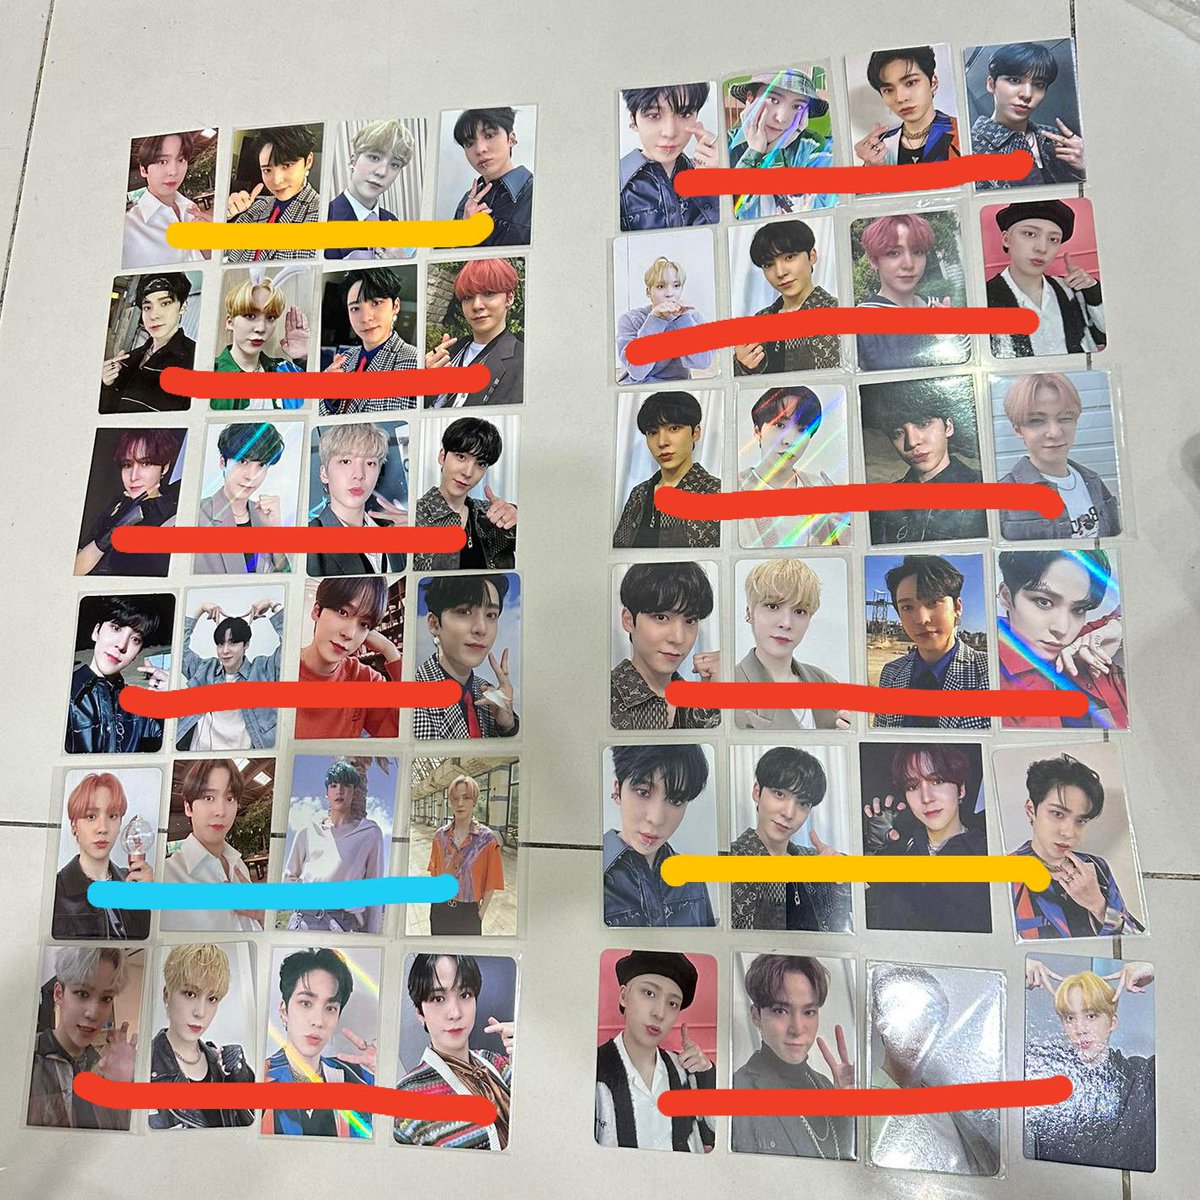 wts lfb ateez yunho qs quitting sale pob pcs

🧡 = php 920 per set
❤️ = php 1,100 per set
💙 = php 1,700 per set

- onhand payo
⭕️ ph based, ww group order 

fever pt 1 pt 2 pt 3 epilogue makestar wonderwall everline kpopstore japan hello82 withdrama yes24 mmt

dm if buying